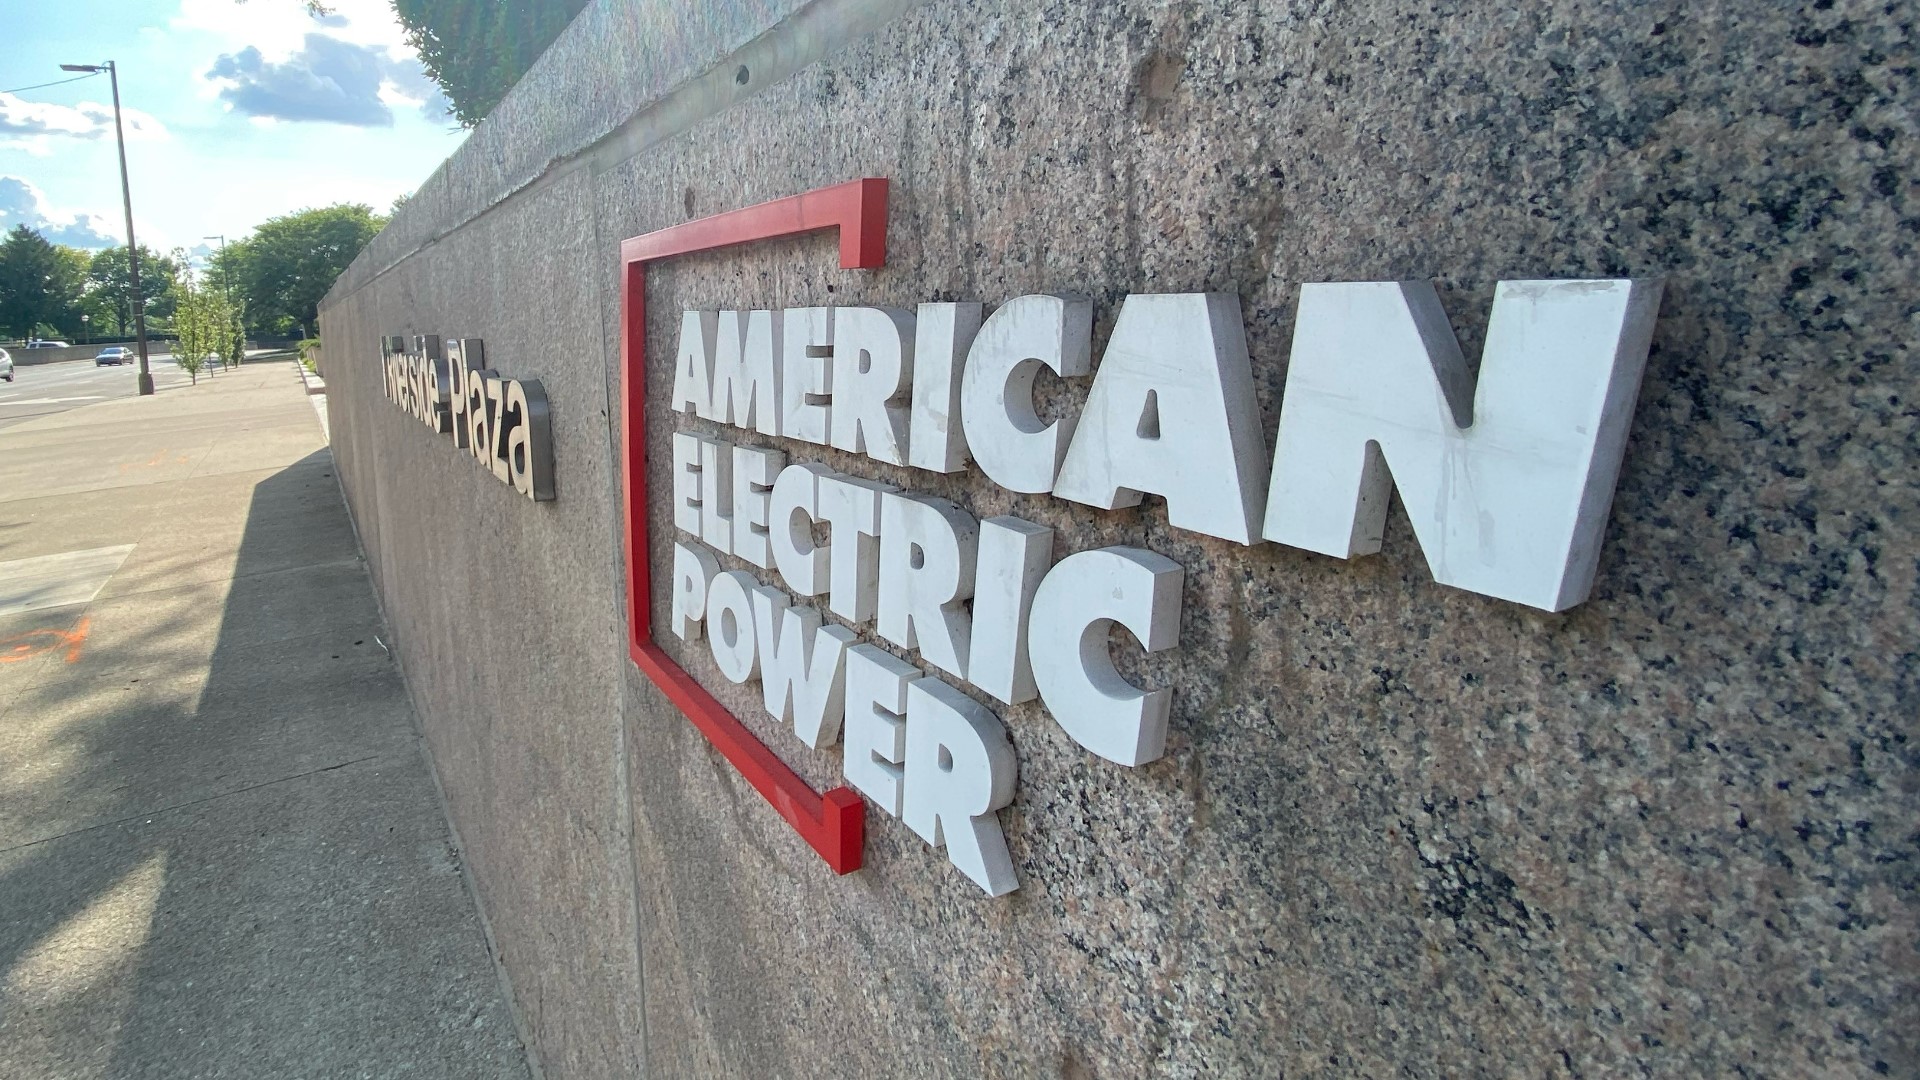 Starting next month, AEP Ohio customers will be paying more for their energy use.